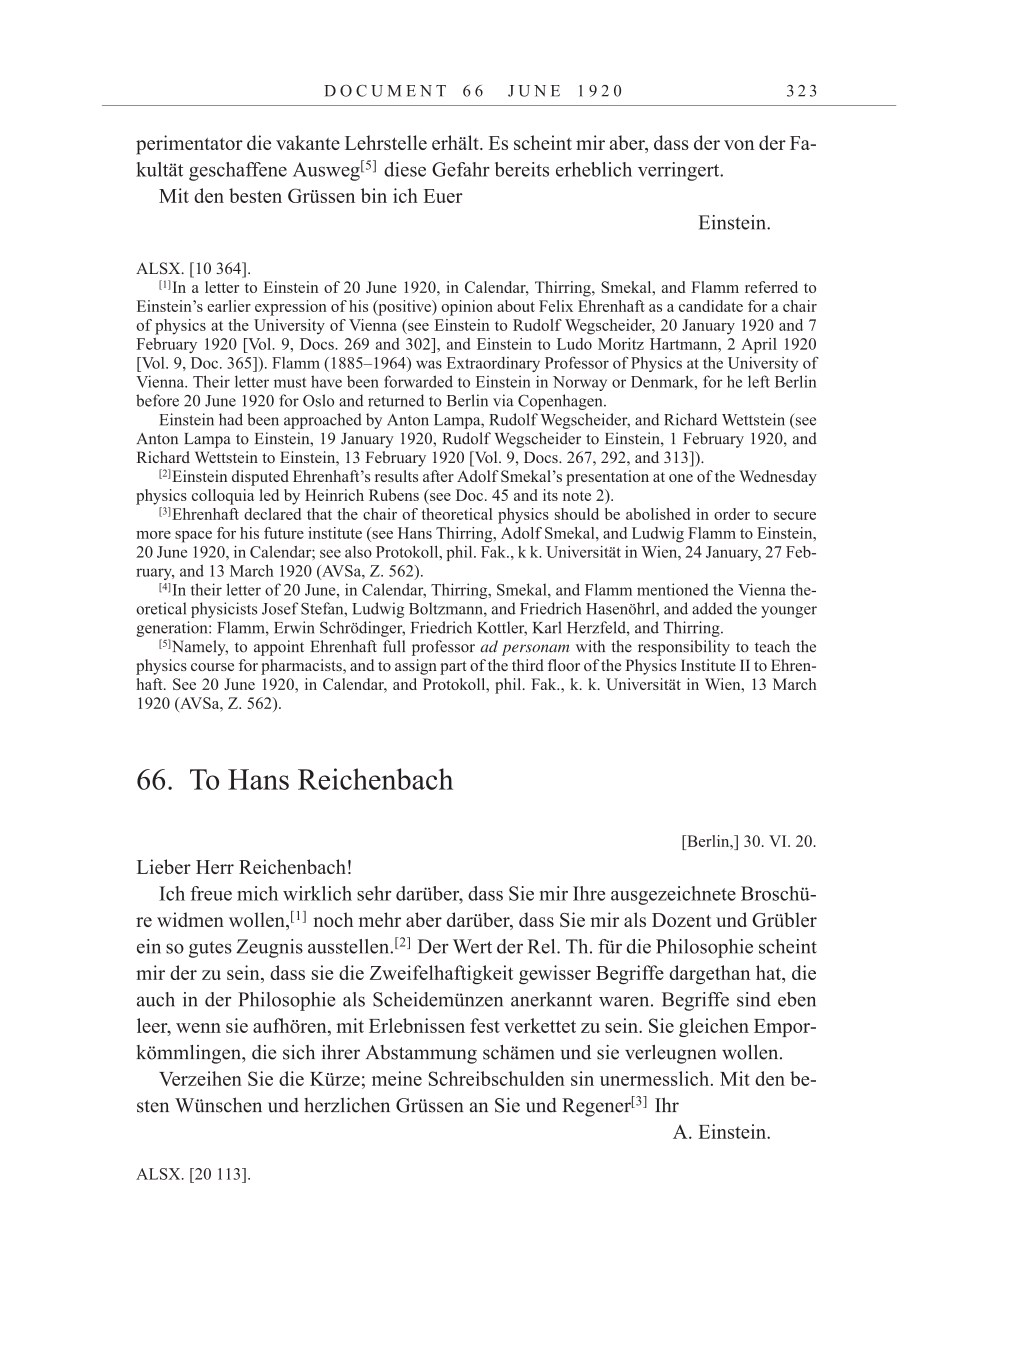 Volume 10: The Berlin Years: Correspondence May-December 1920 / Supplementary Correspondence 1909-1920 page 323